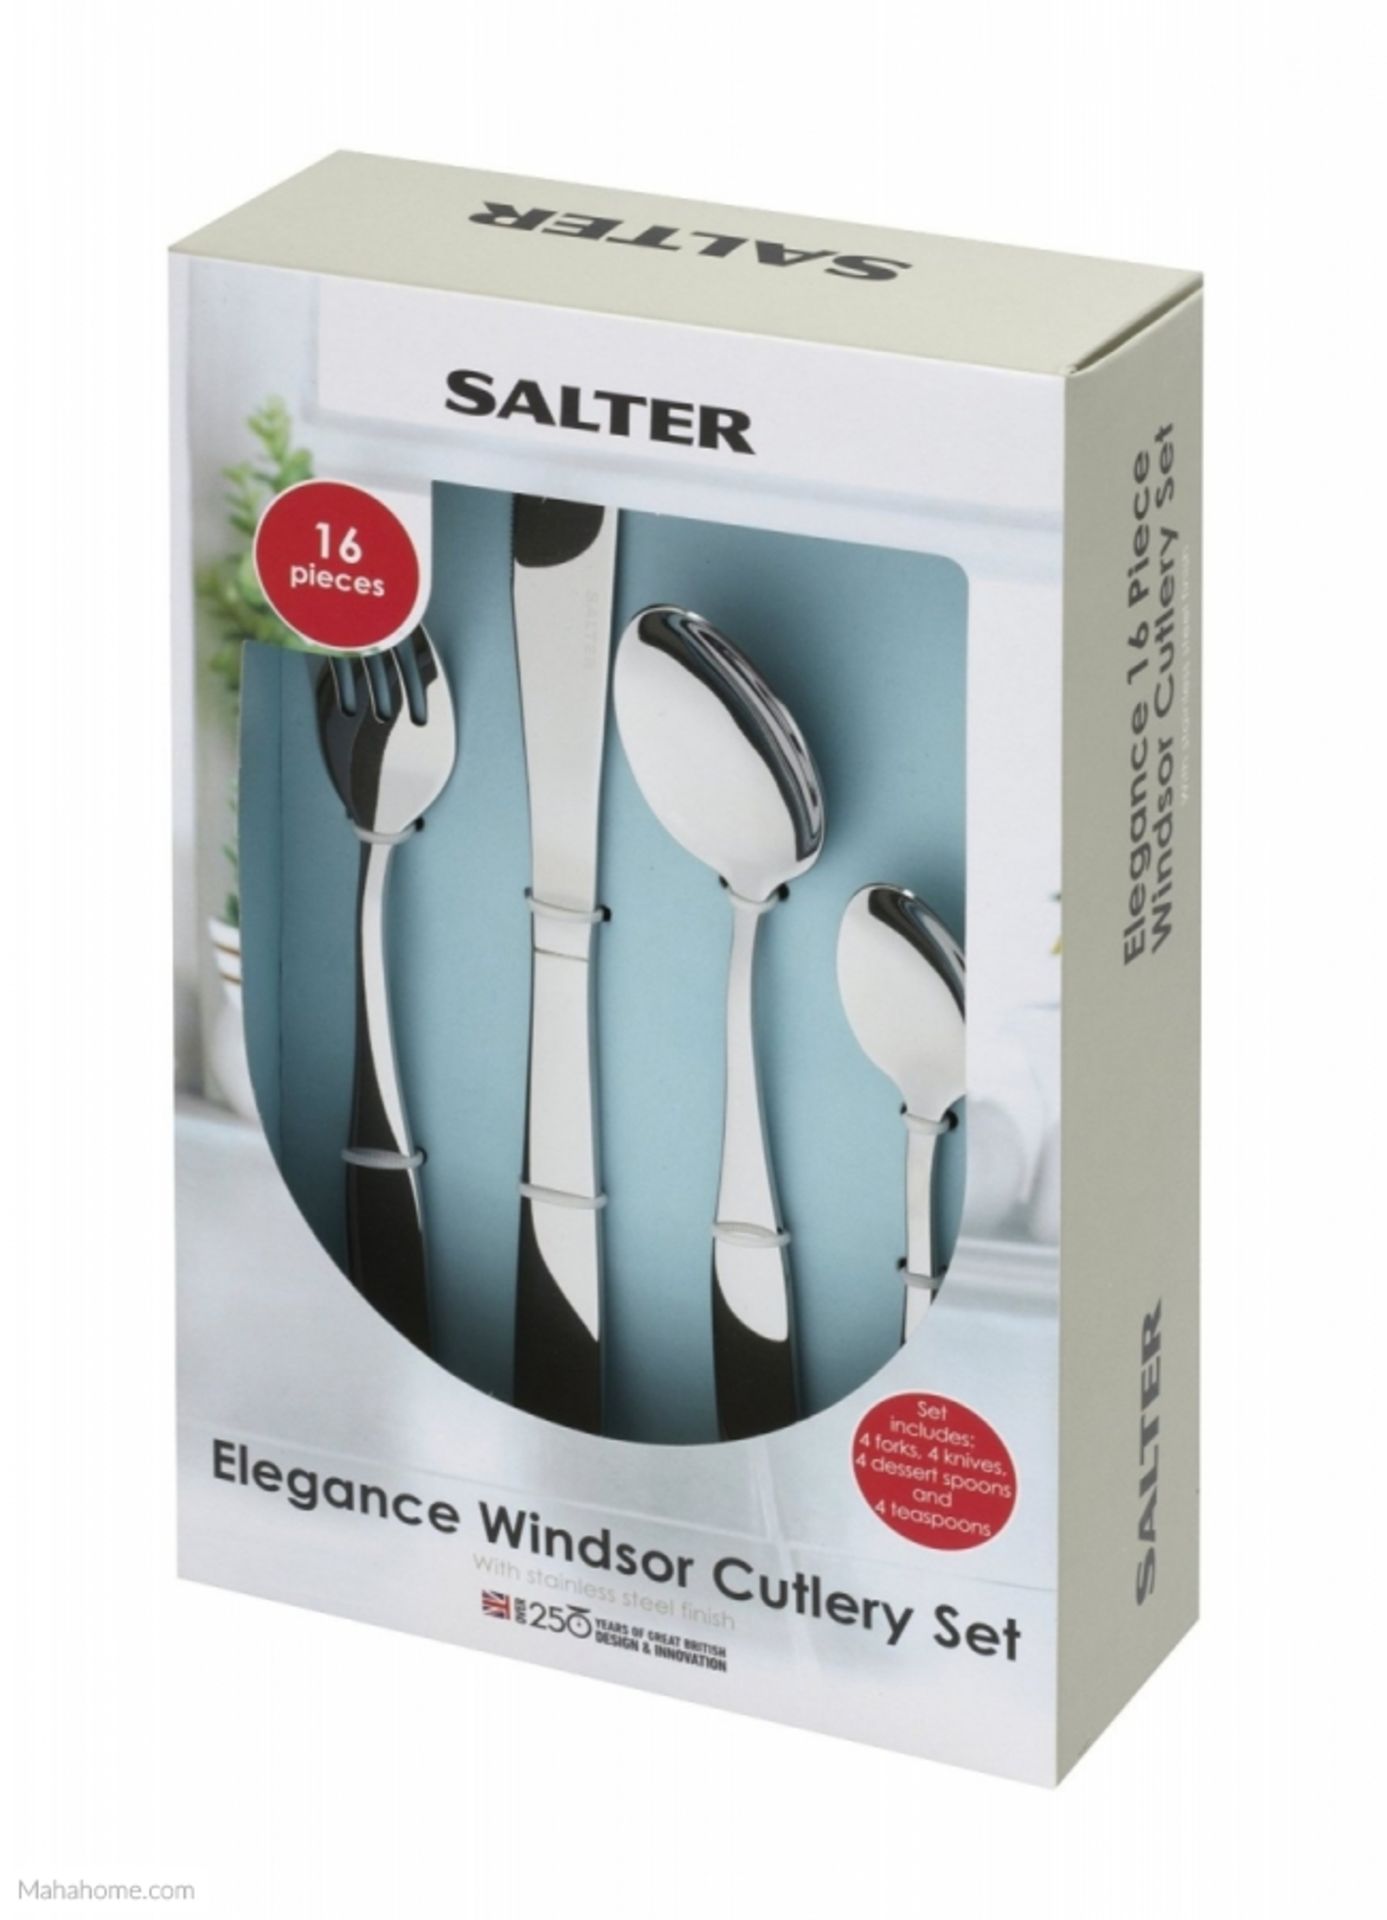 V Brand New Salter 16 Piece Stainless Steel Windsor Cutlery Set - ISP £29.99 (Mahahome.com) X 2 YOUR